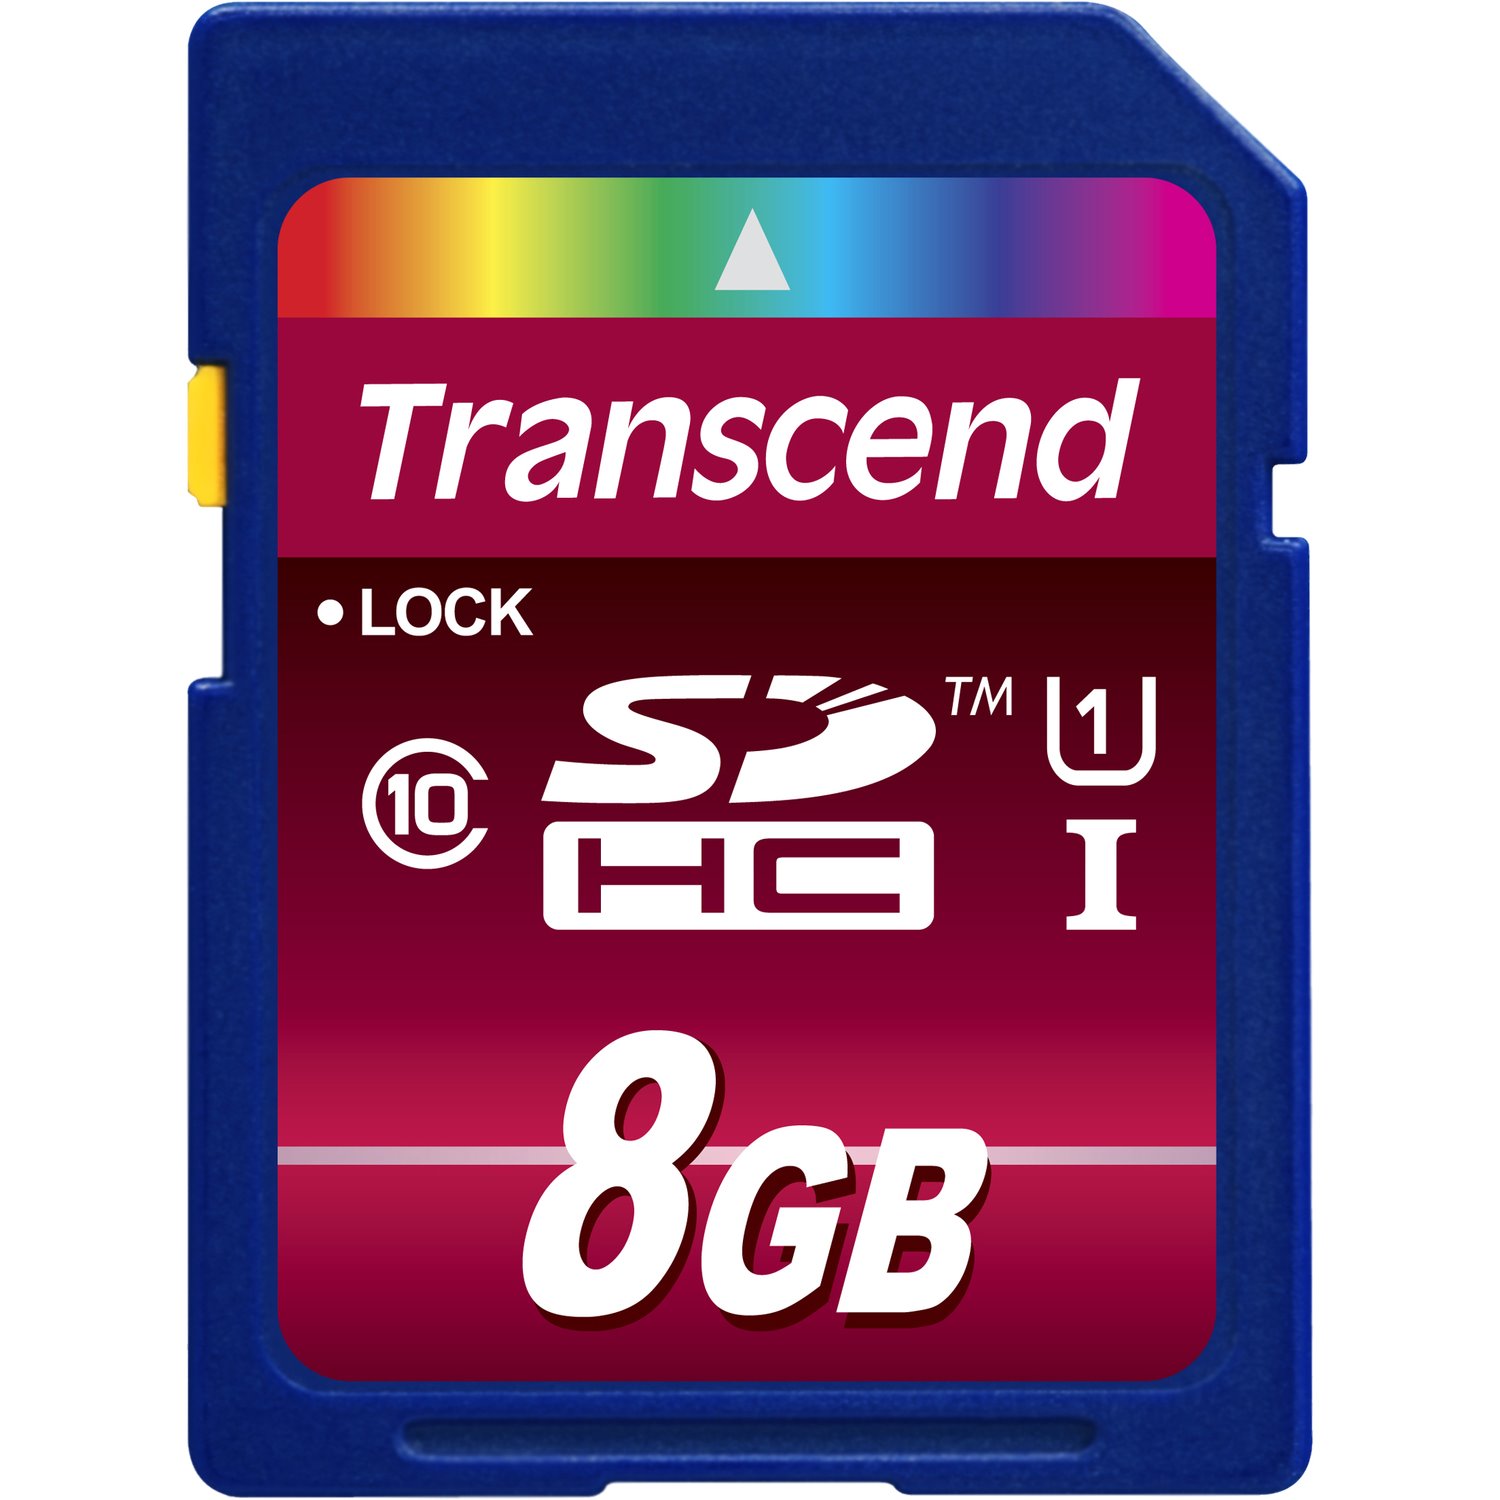 Transcend 8 GB Class 10/UHS-I SDHC - 1 Pack